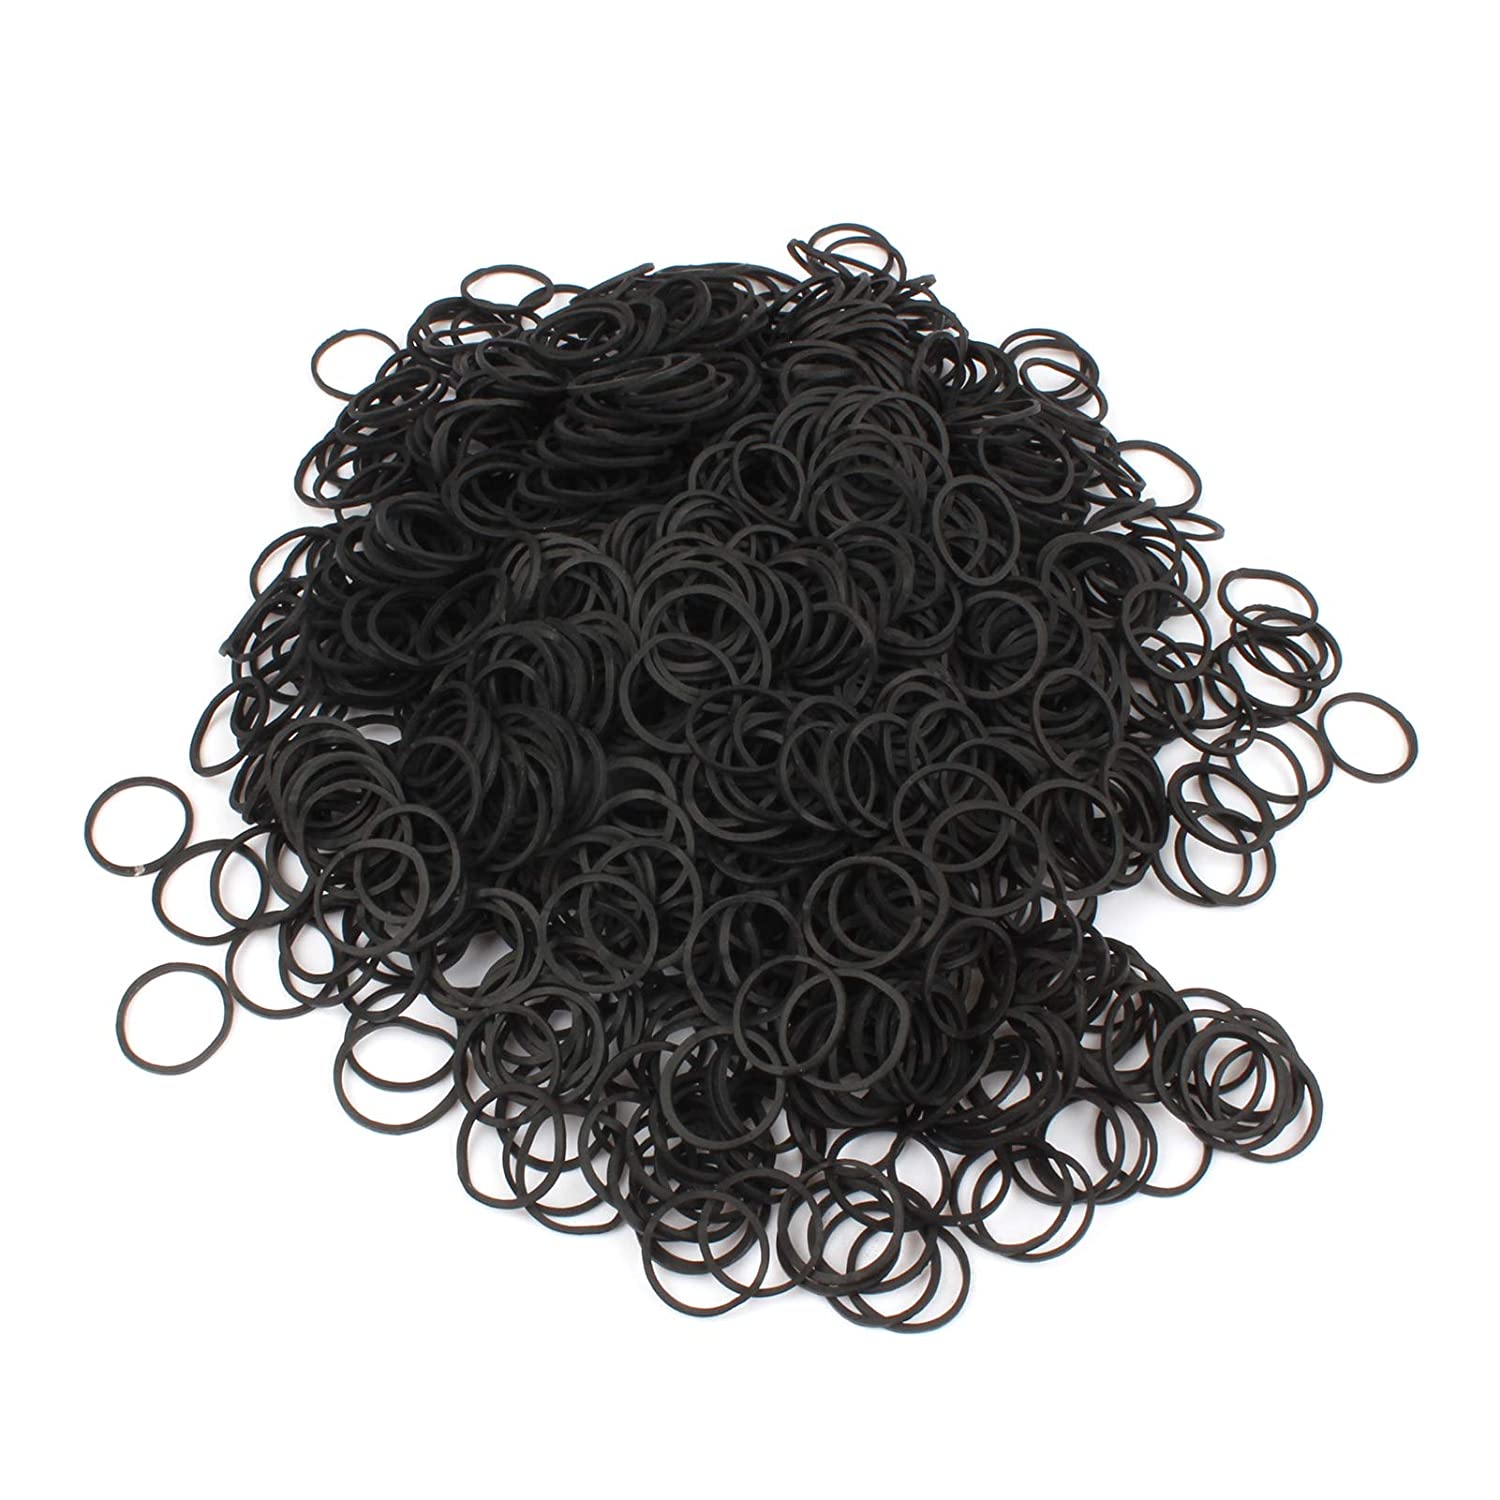 Mini Rubber Bands, Soft Elastic Bands, Premium Small Tiny Black Rubber Bands  For Kids Hair, Braids Hair, Wedding Hairstyle (1000 Pieces, Black)